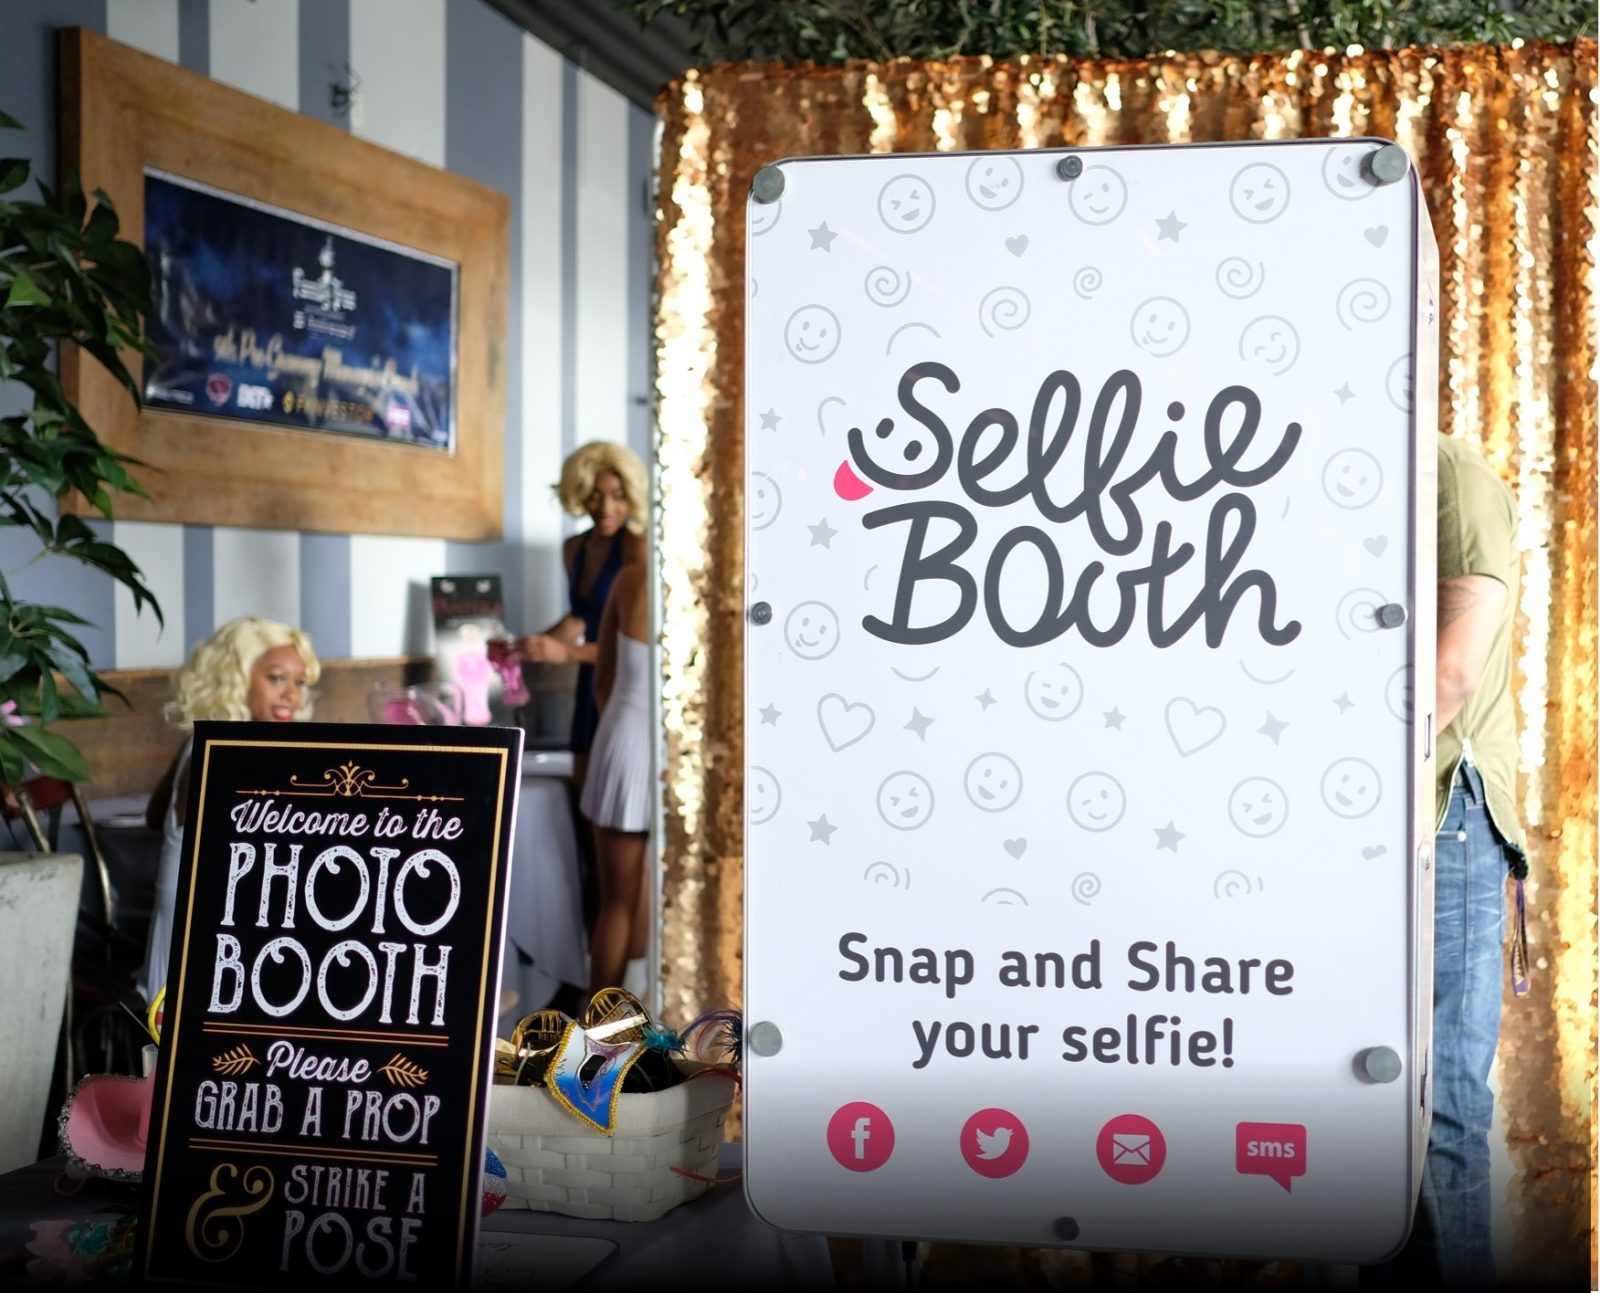 Elevate Your Party With Photo Booth Rental - Selfie Booth Co.